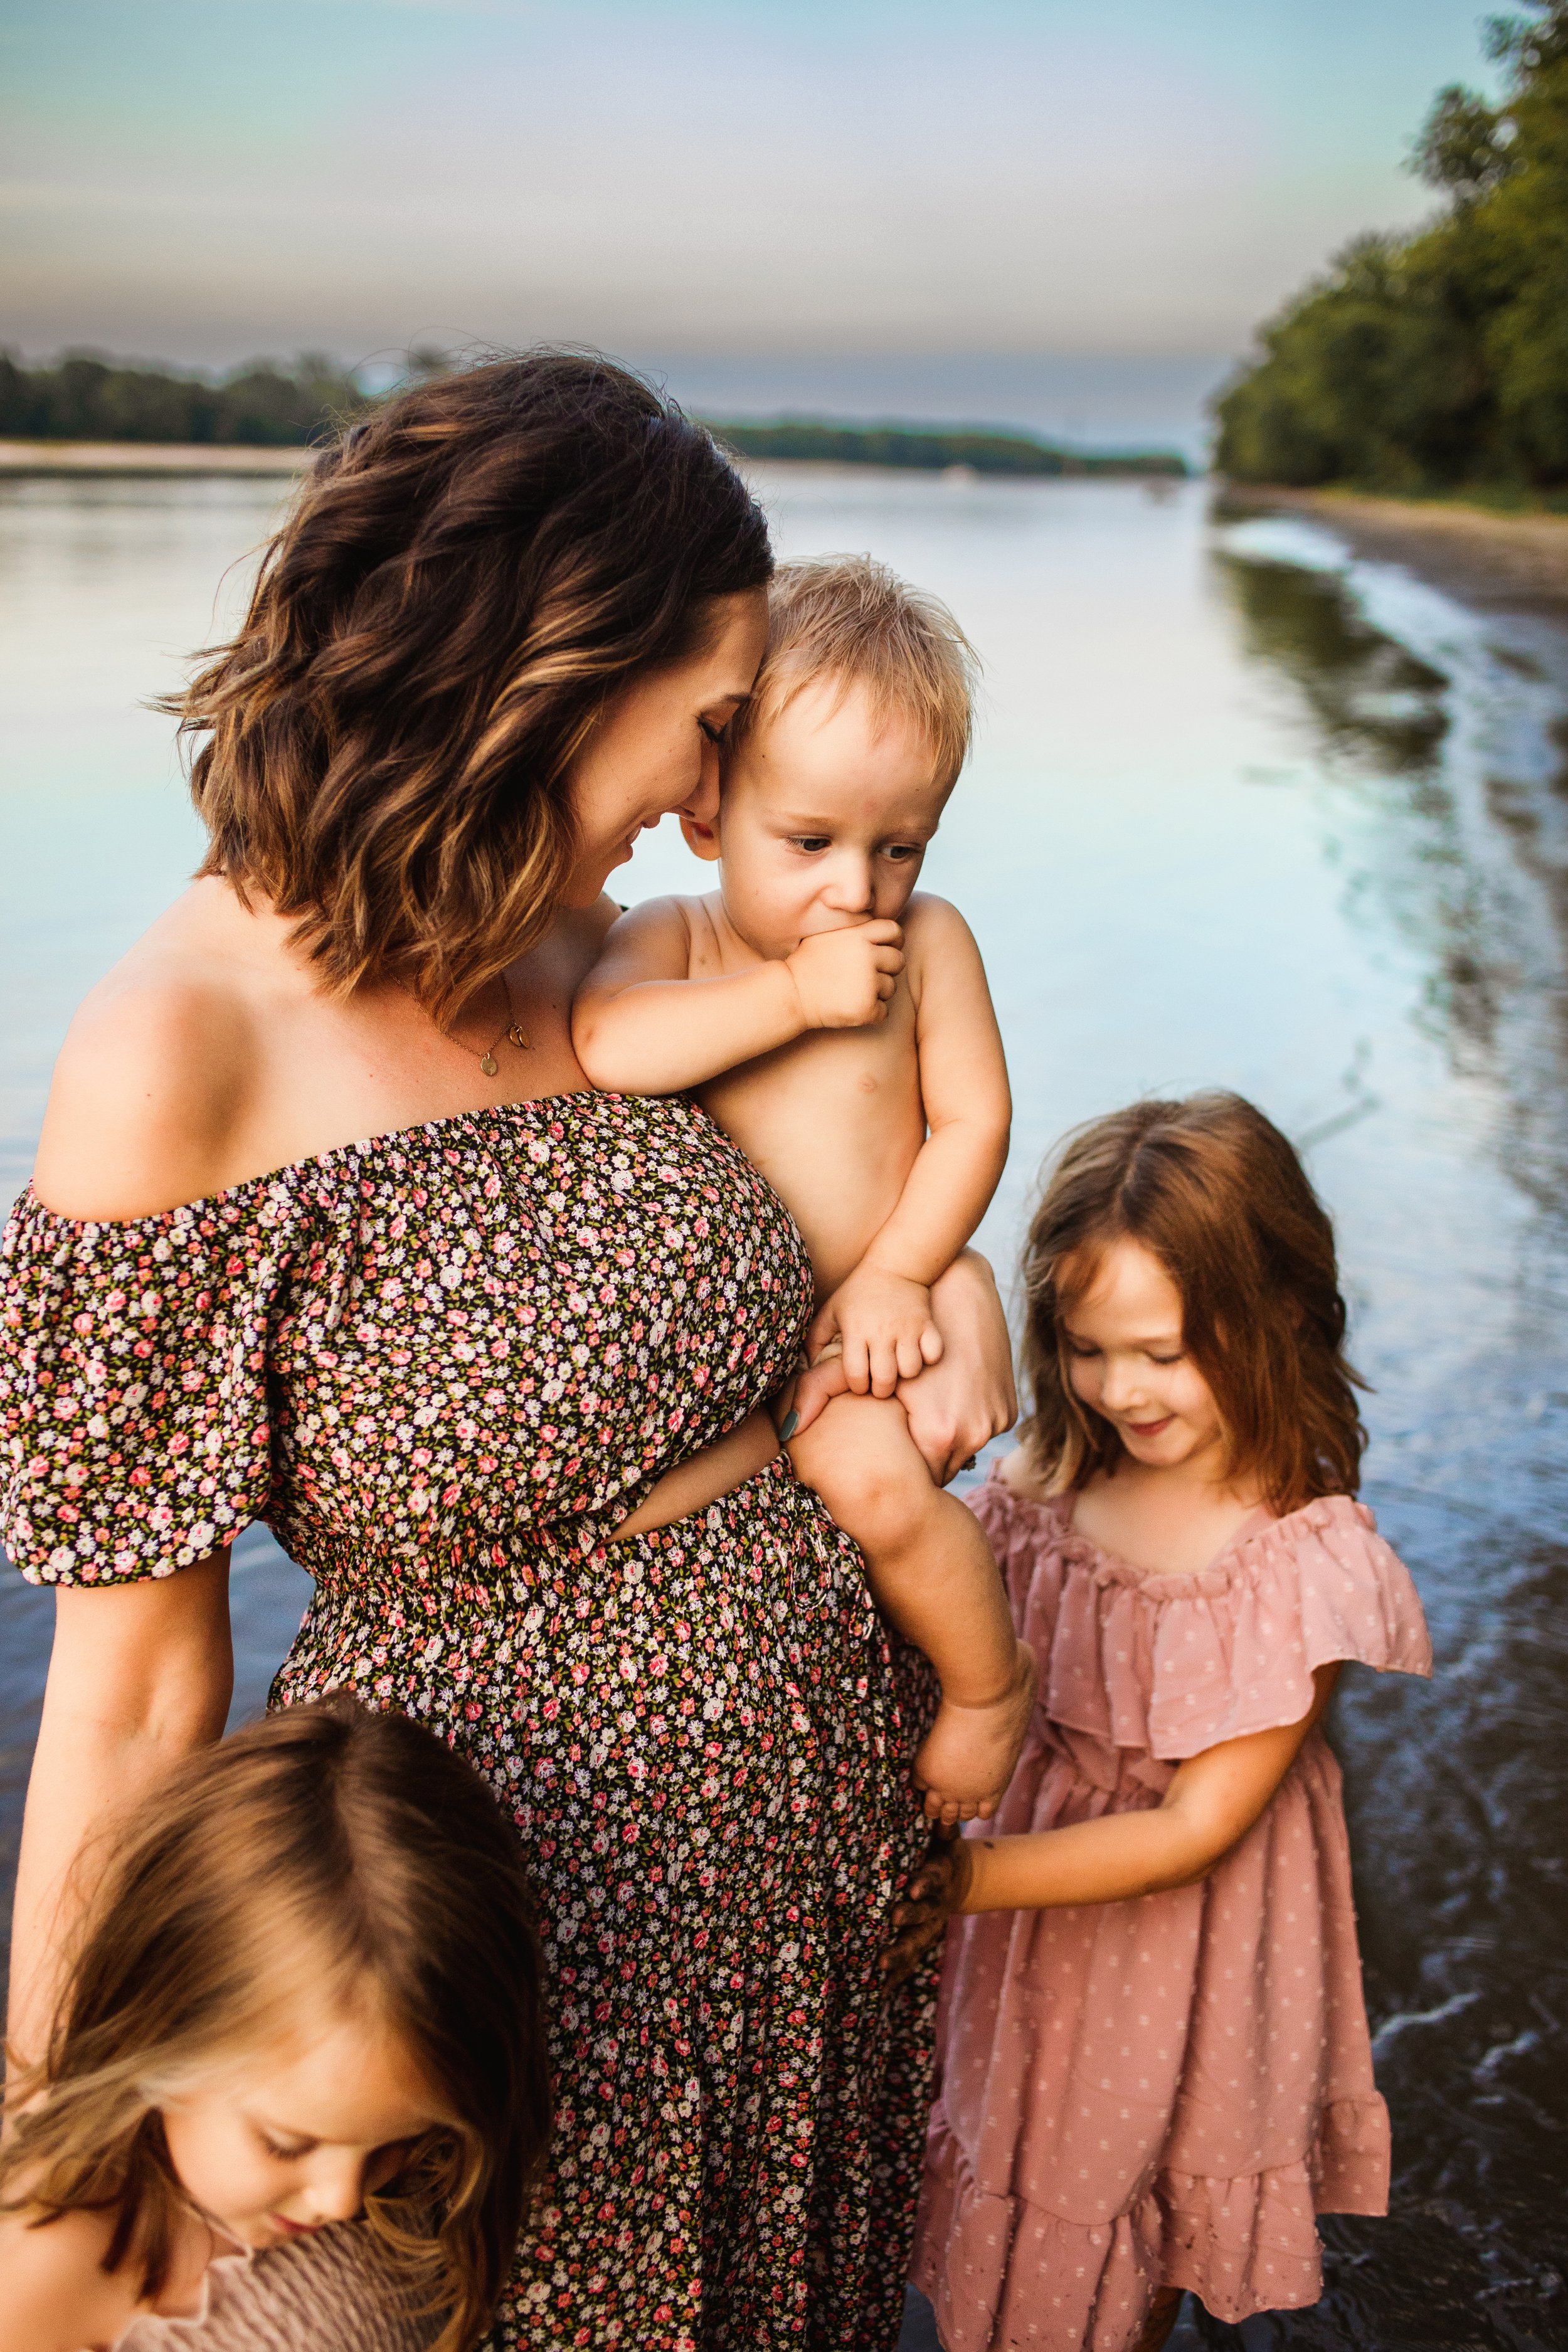  Teala Ward Photography captures a mother wearing an off-the-shoulder floral dress snuggling her children. motherhood dress #TealaWardPhotography #TealaWardFamilies #IllinoisRiverPhotography #IllinoisFamilyPhotography #familylifestylepics 